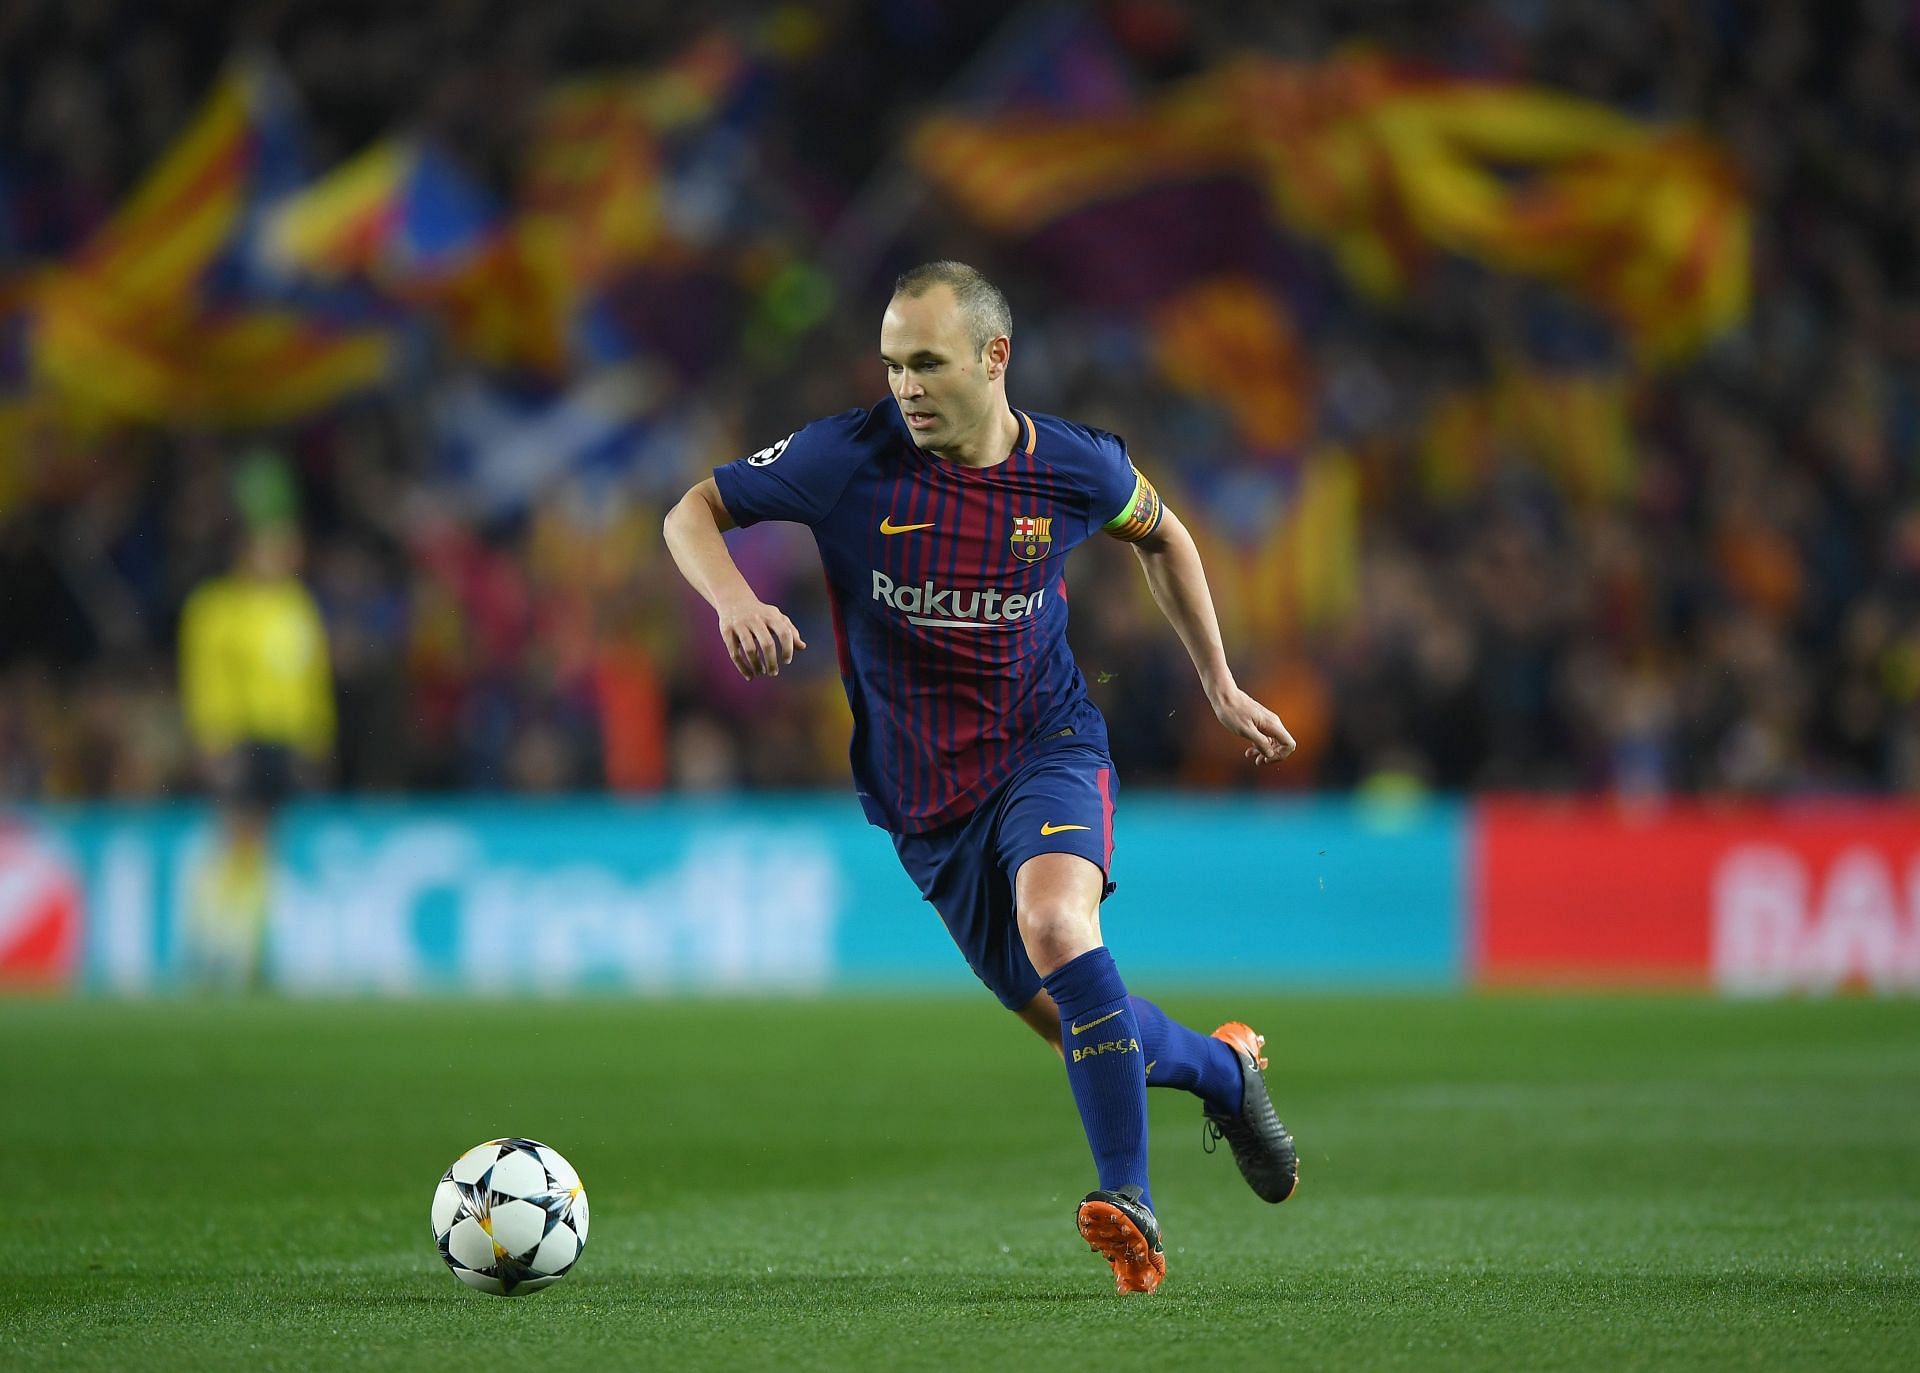 Andres Iniesta will go down as one of the greatest midfielders of all-time